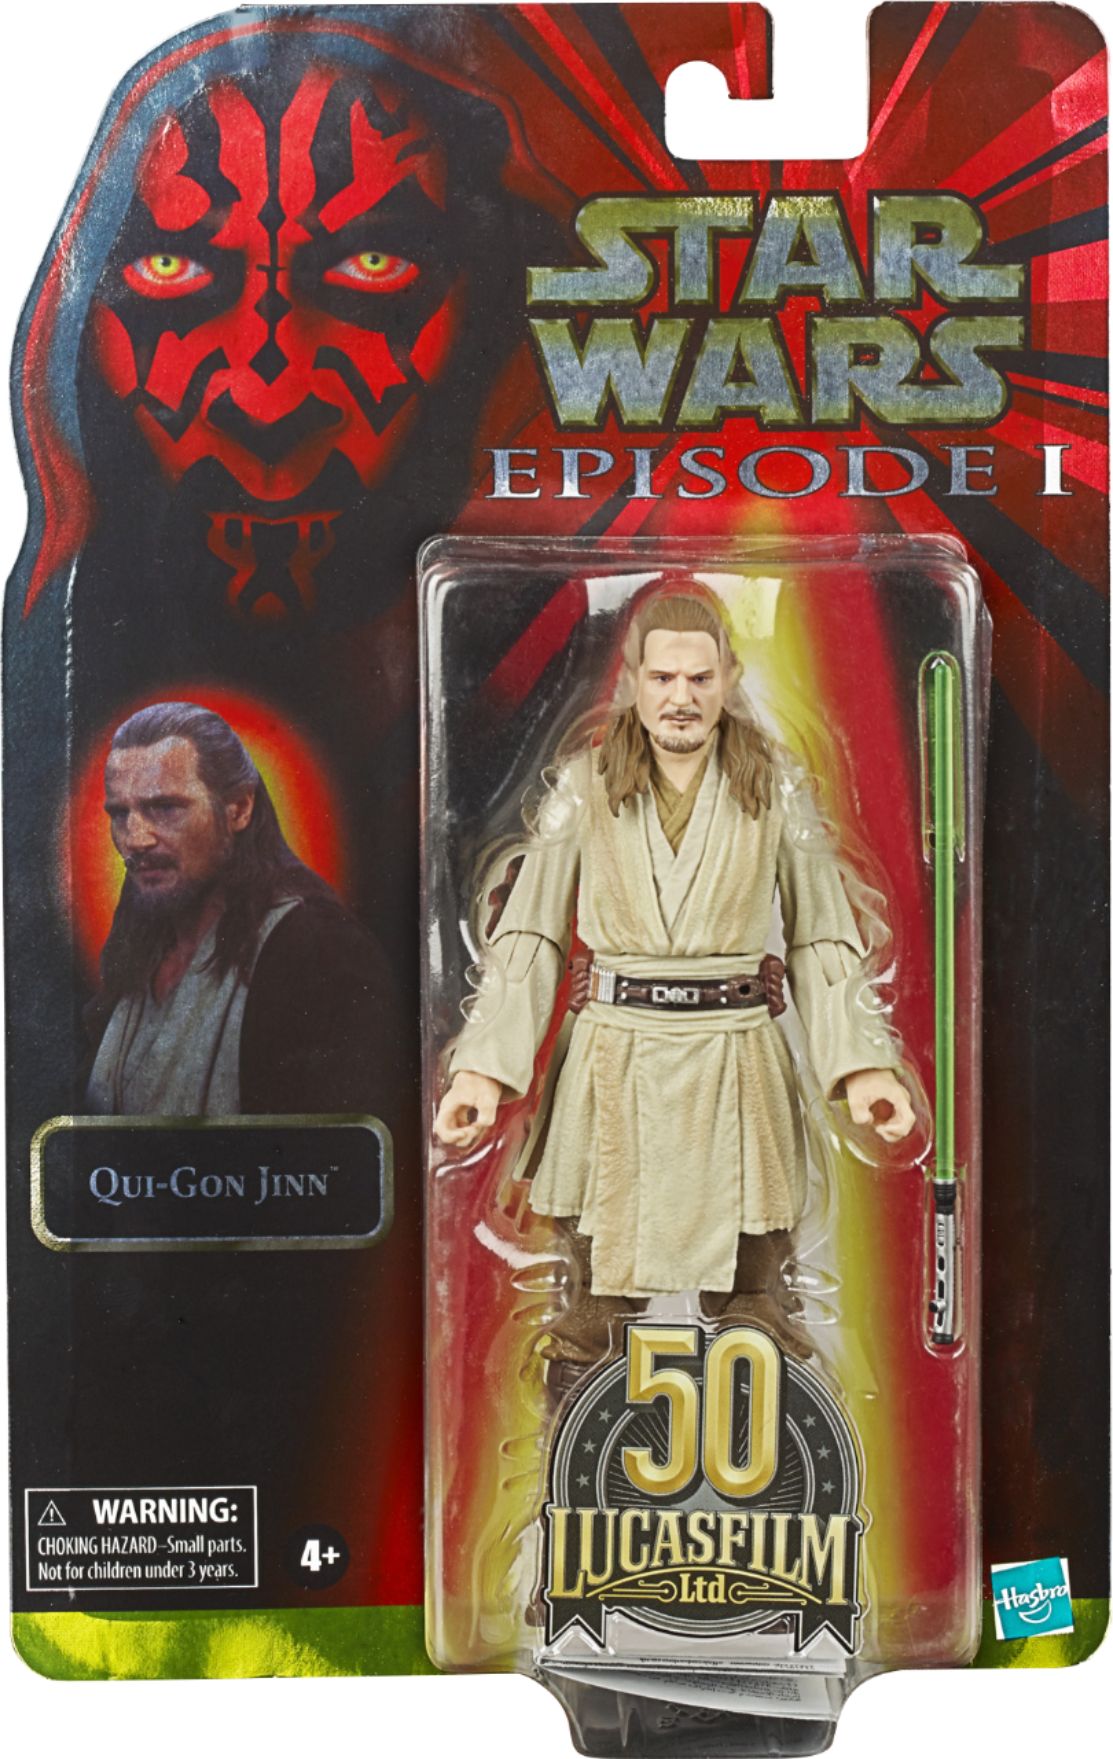 Why Qui-Gon Jinn Was the Most Powerful Jedi in the Star Wars